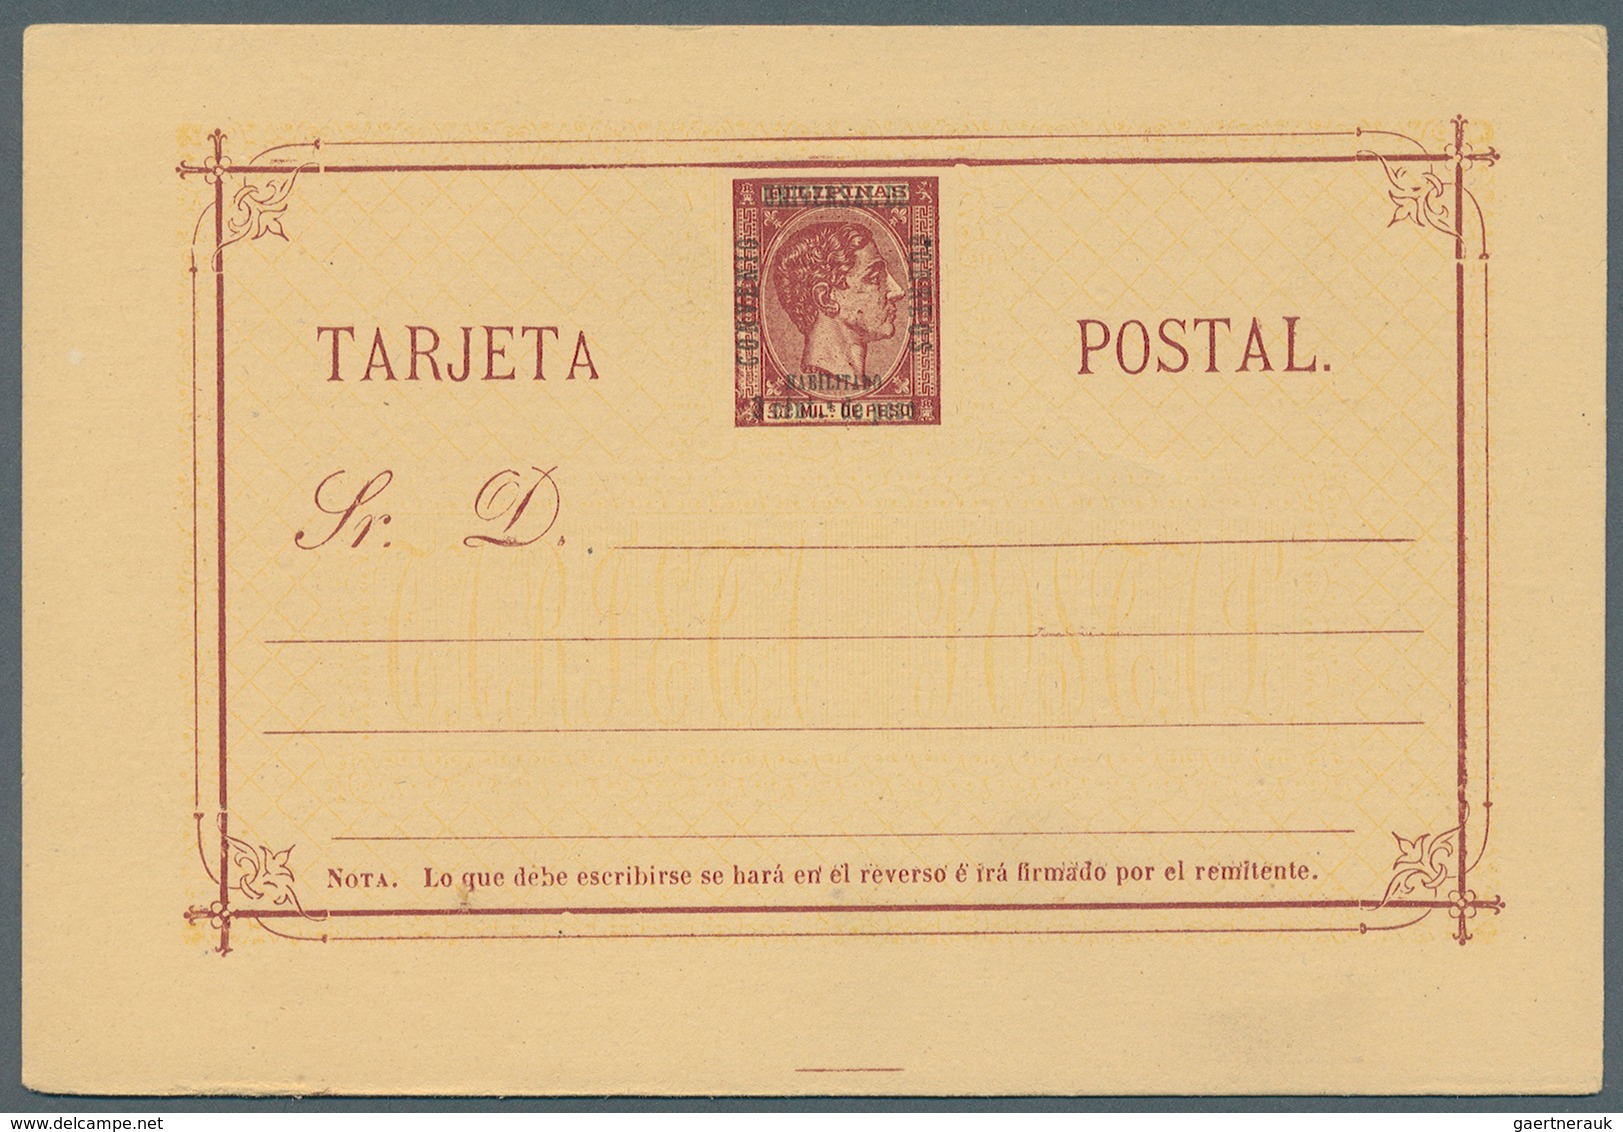 Philippinen: 1880 UPU surcharge 3c/50c, tied by oval cancel of crosses in association with Manila di